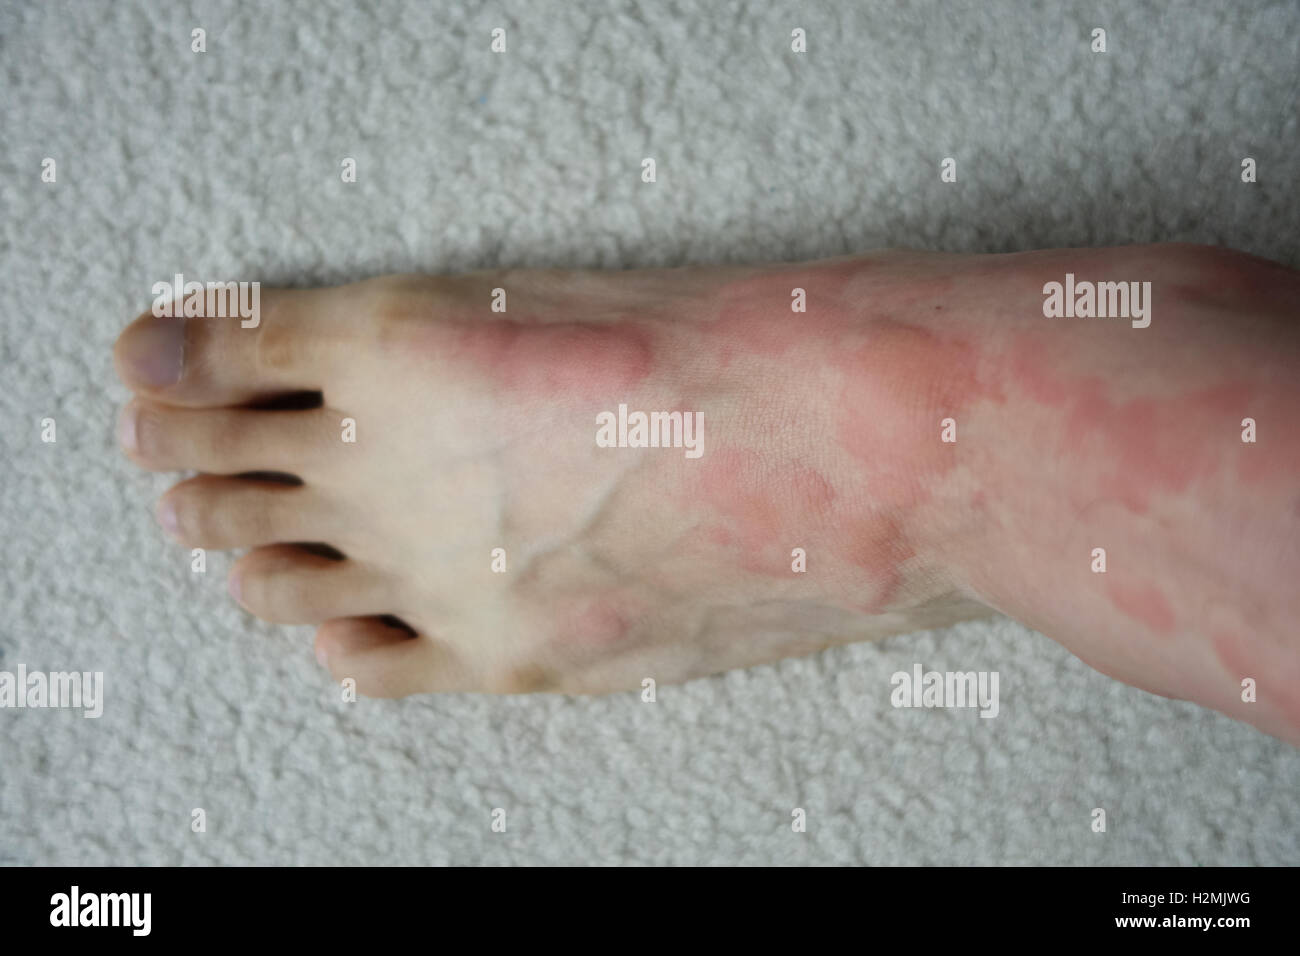 severe skin allergy reaction hive foot Stock Photo